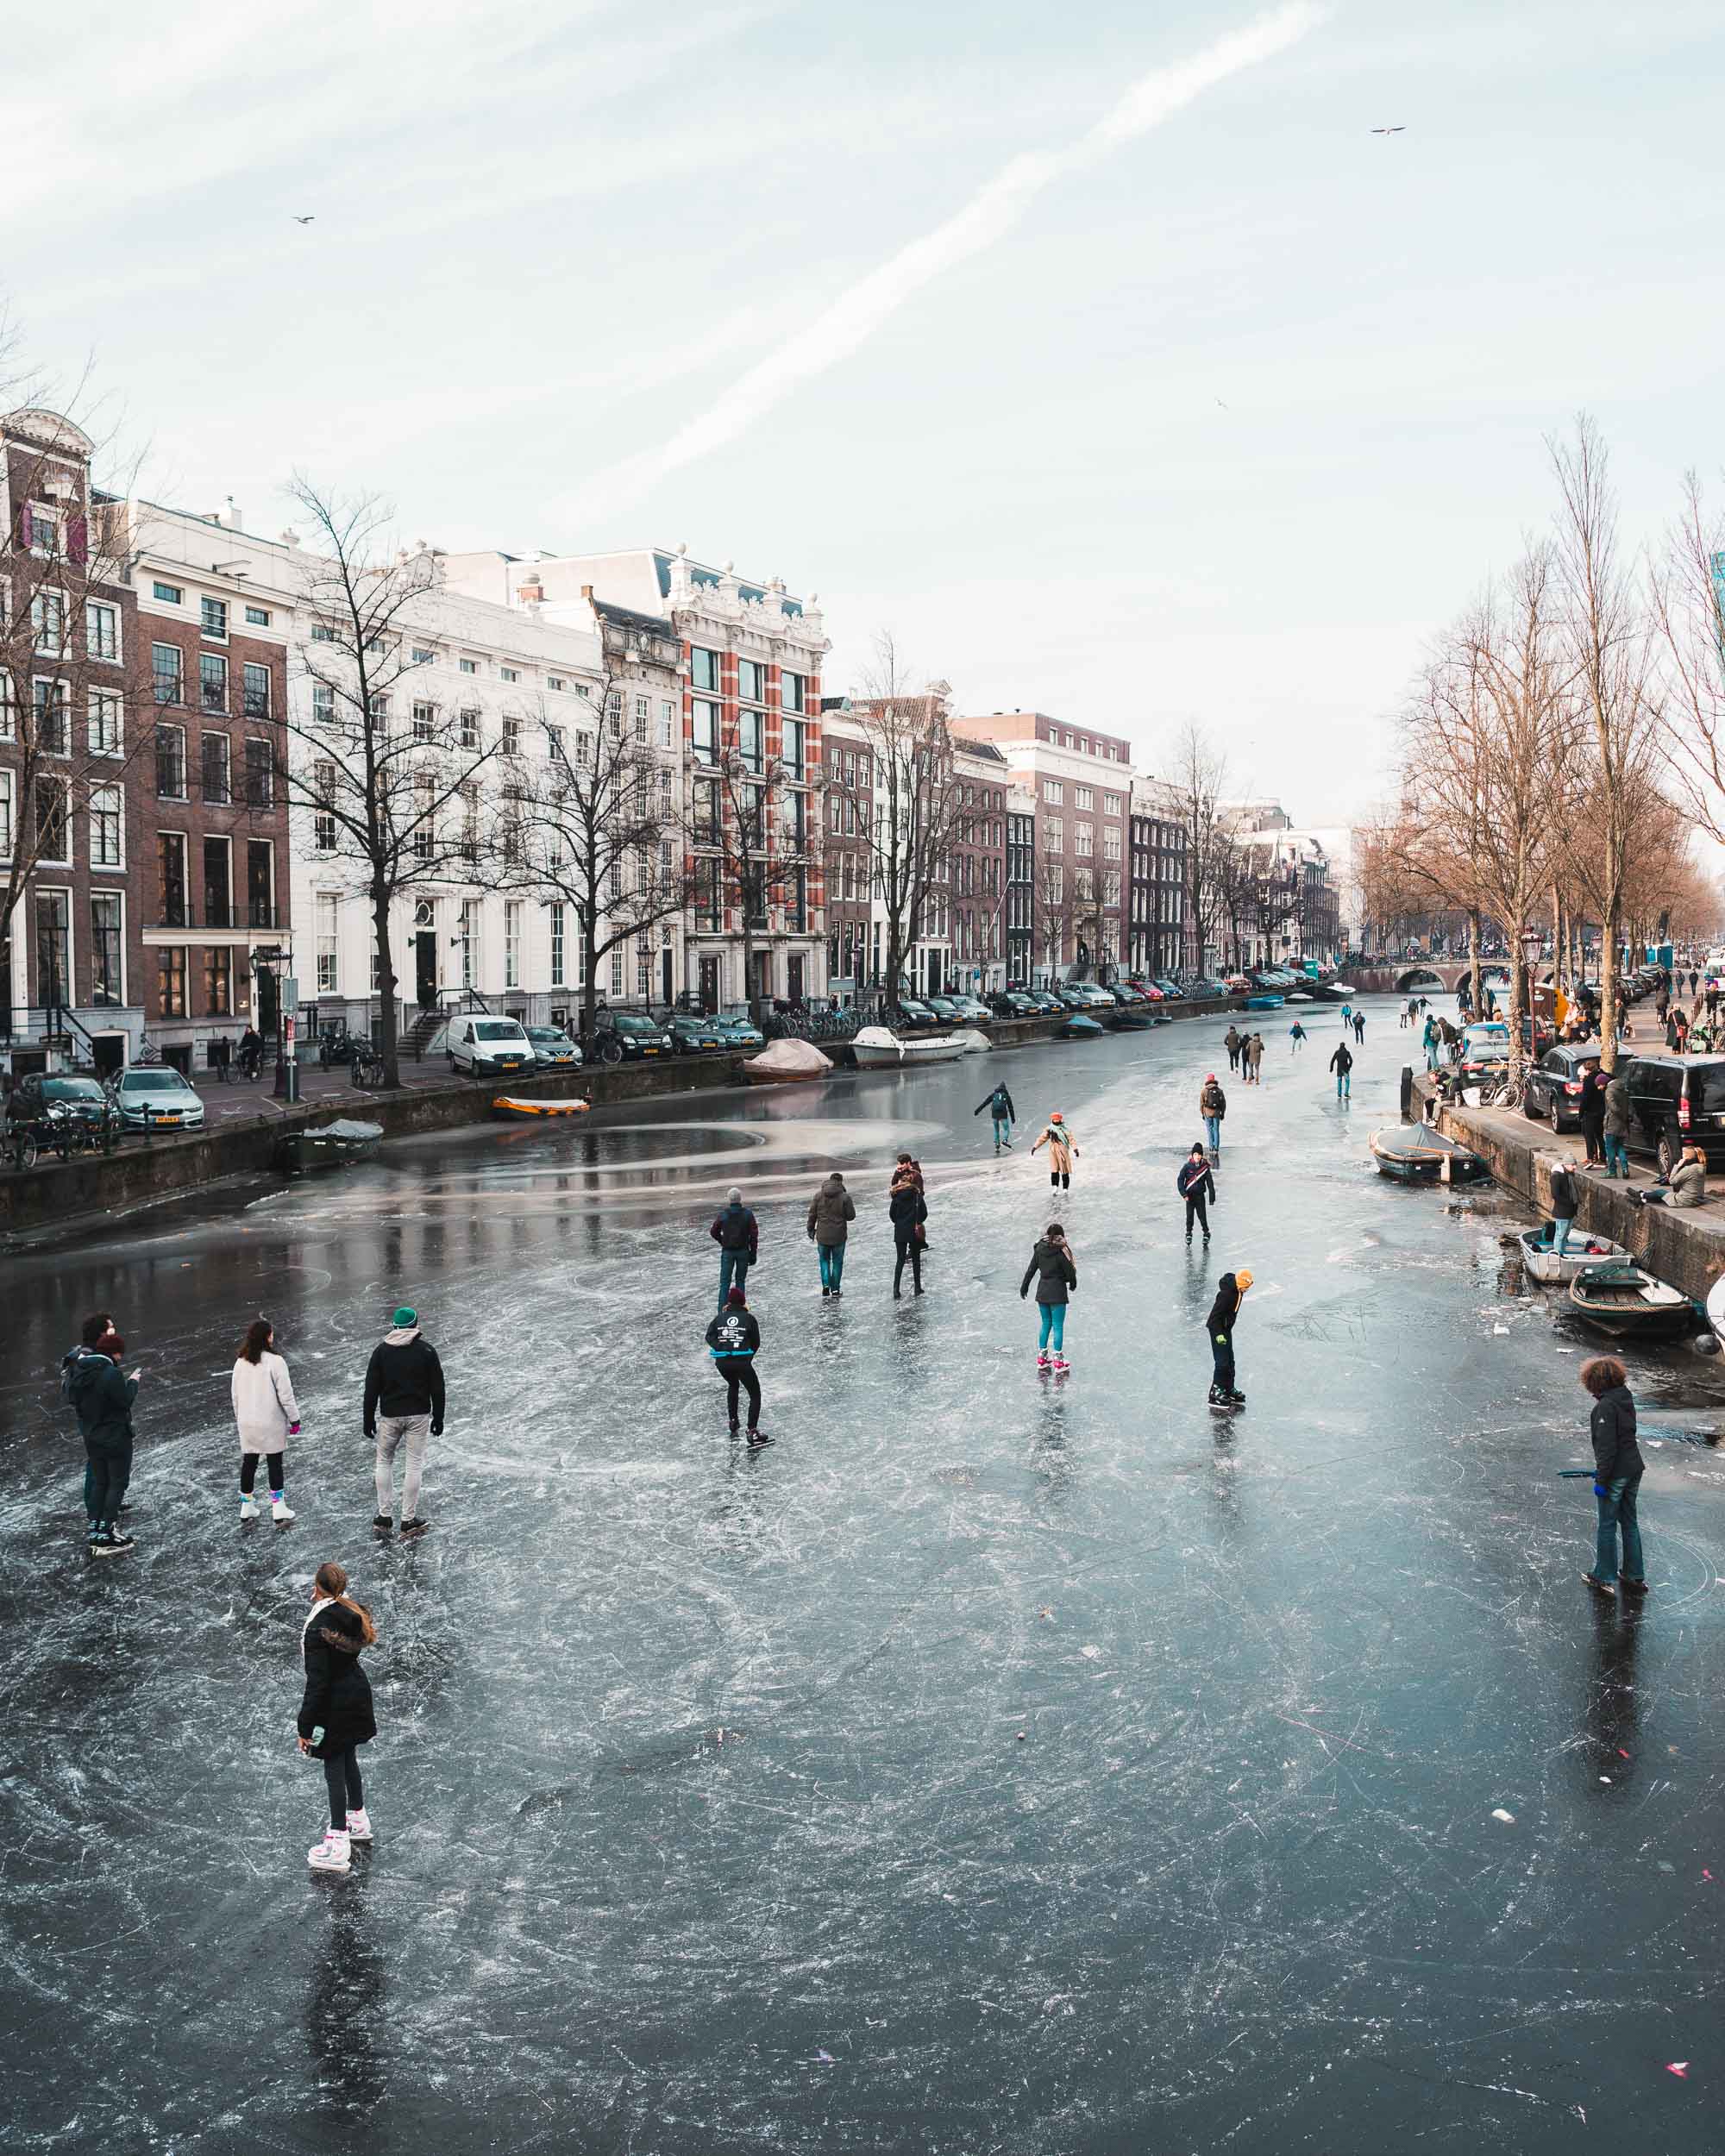 Ice skaters on the frozen canals in Amsterdam The Netherlands